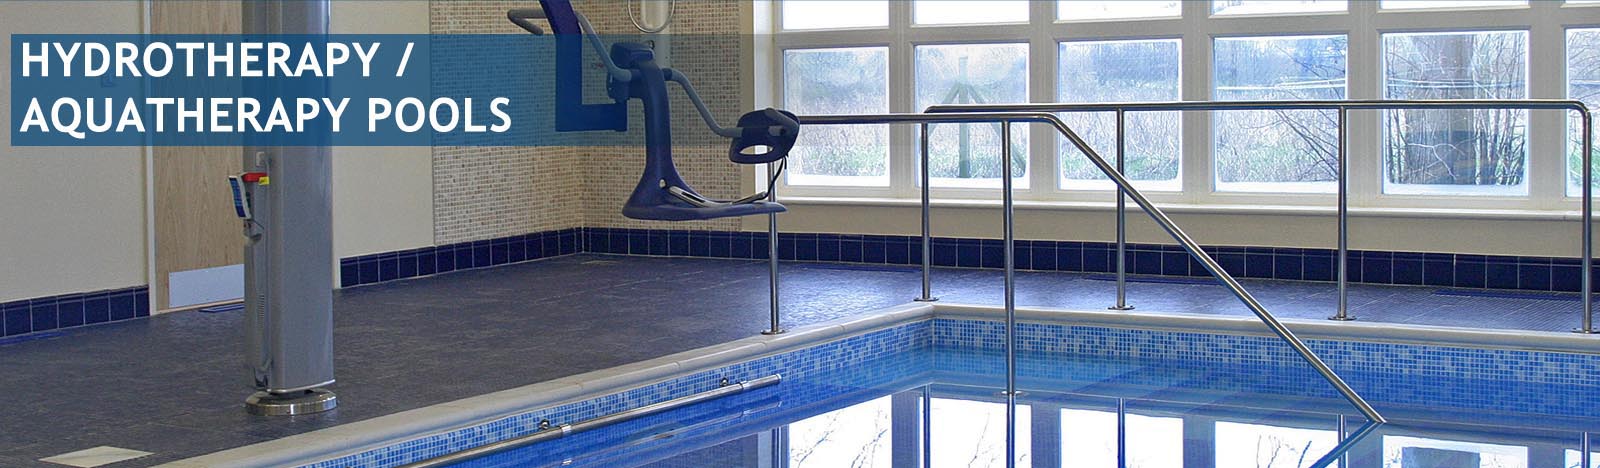 hydrotherapy pools installers nottingham